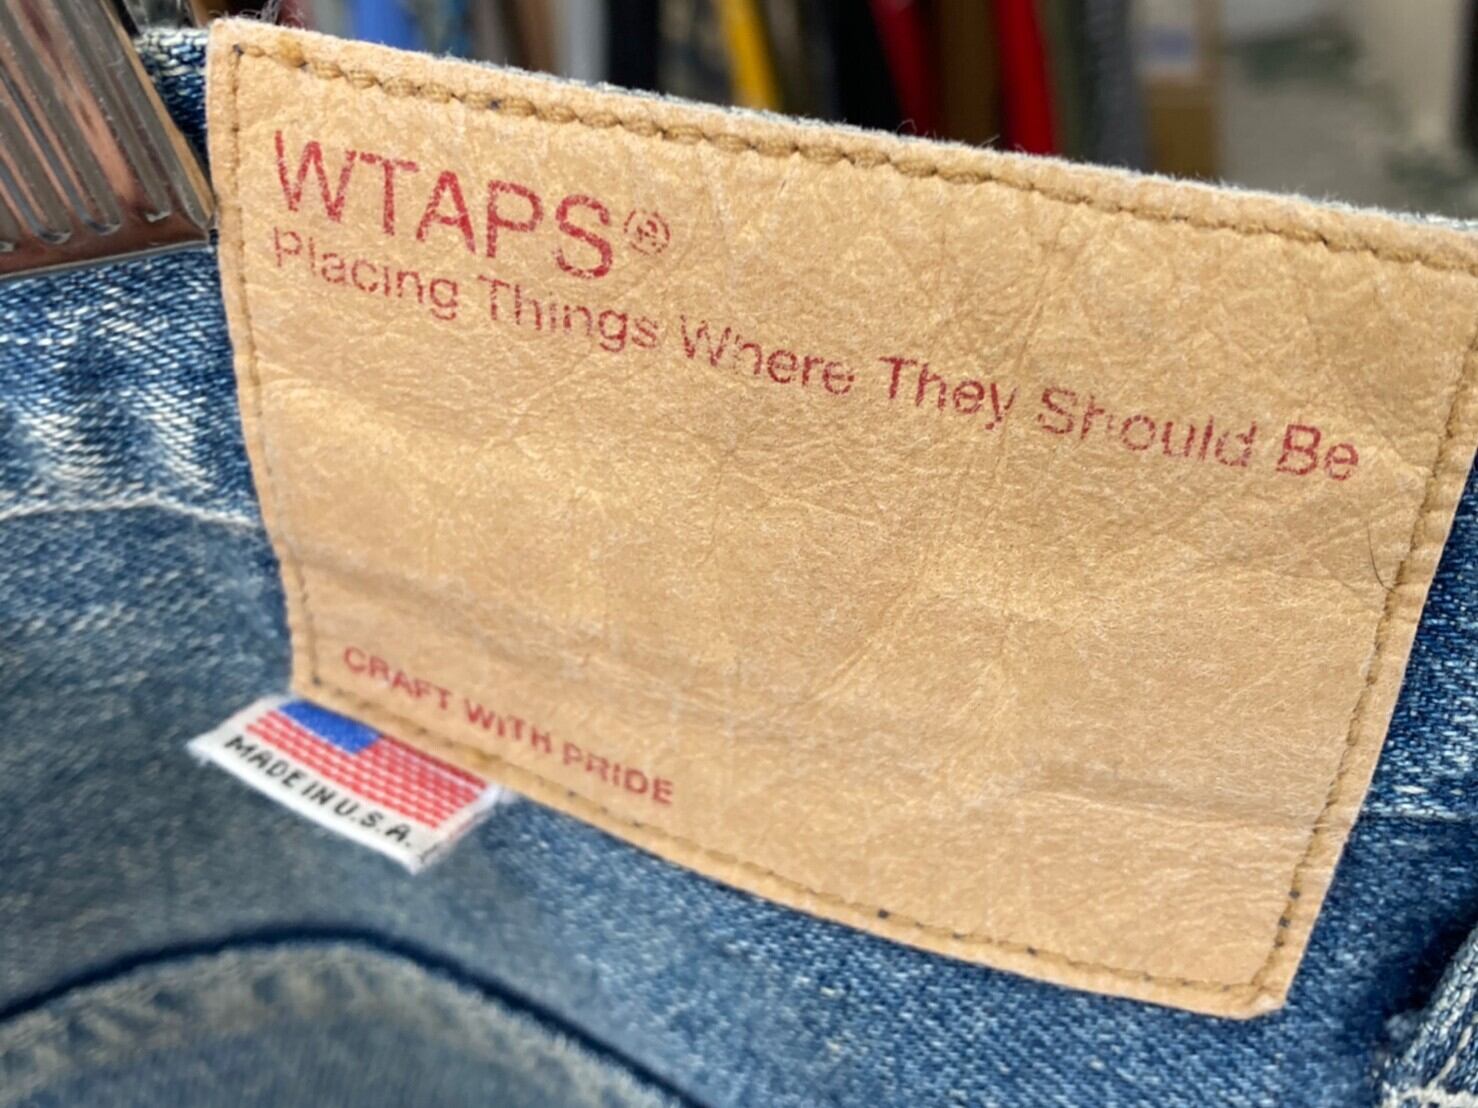 WTAPS MADE IN USA BAGGIE BASIC WASHED